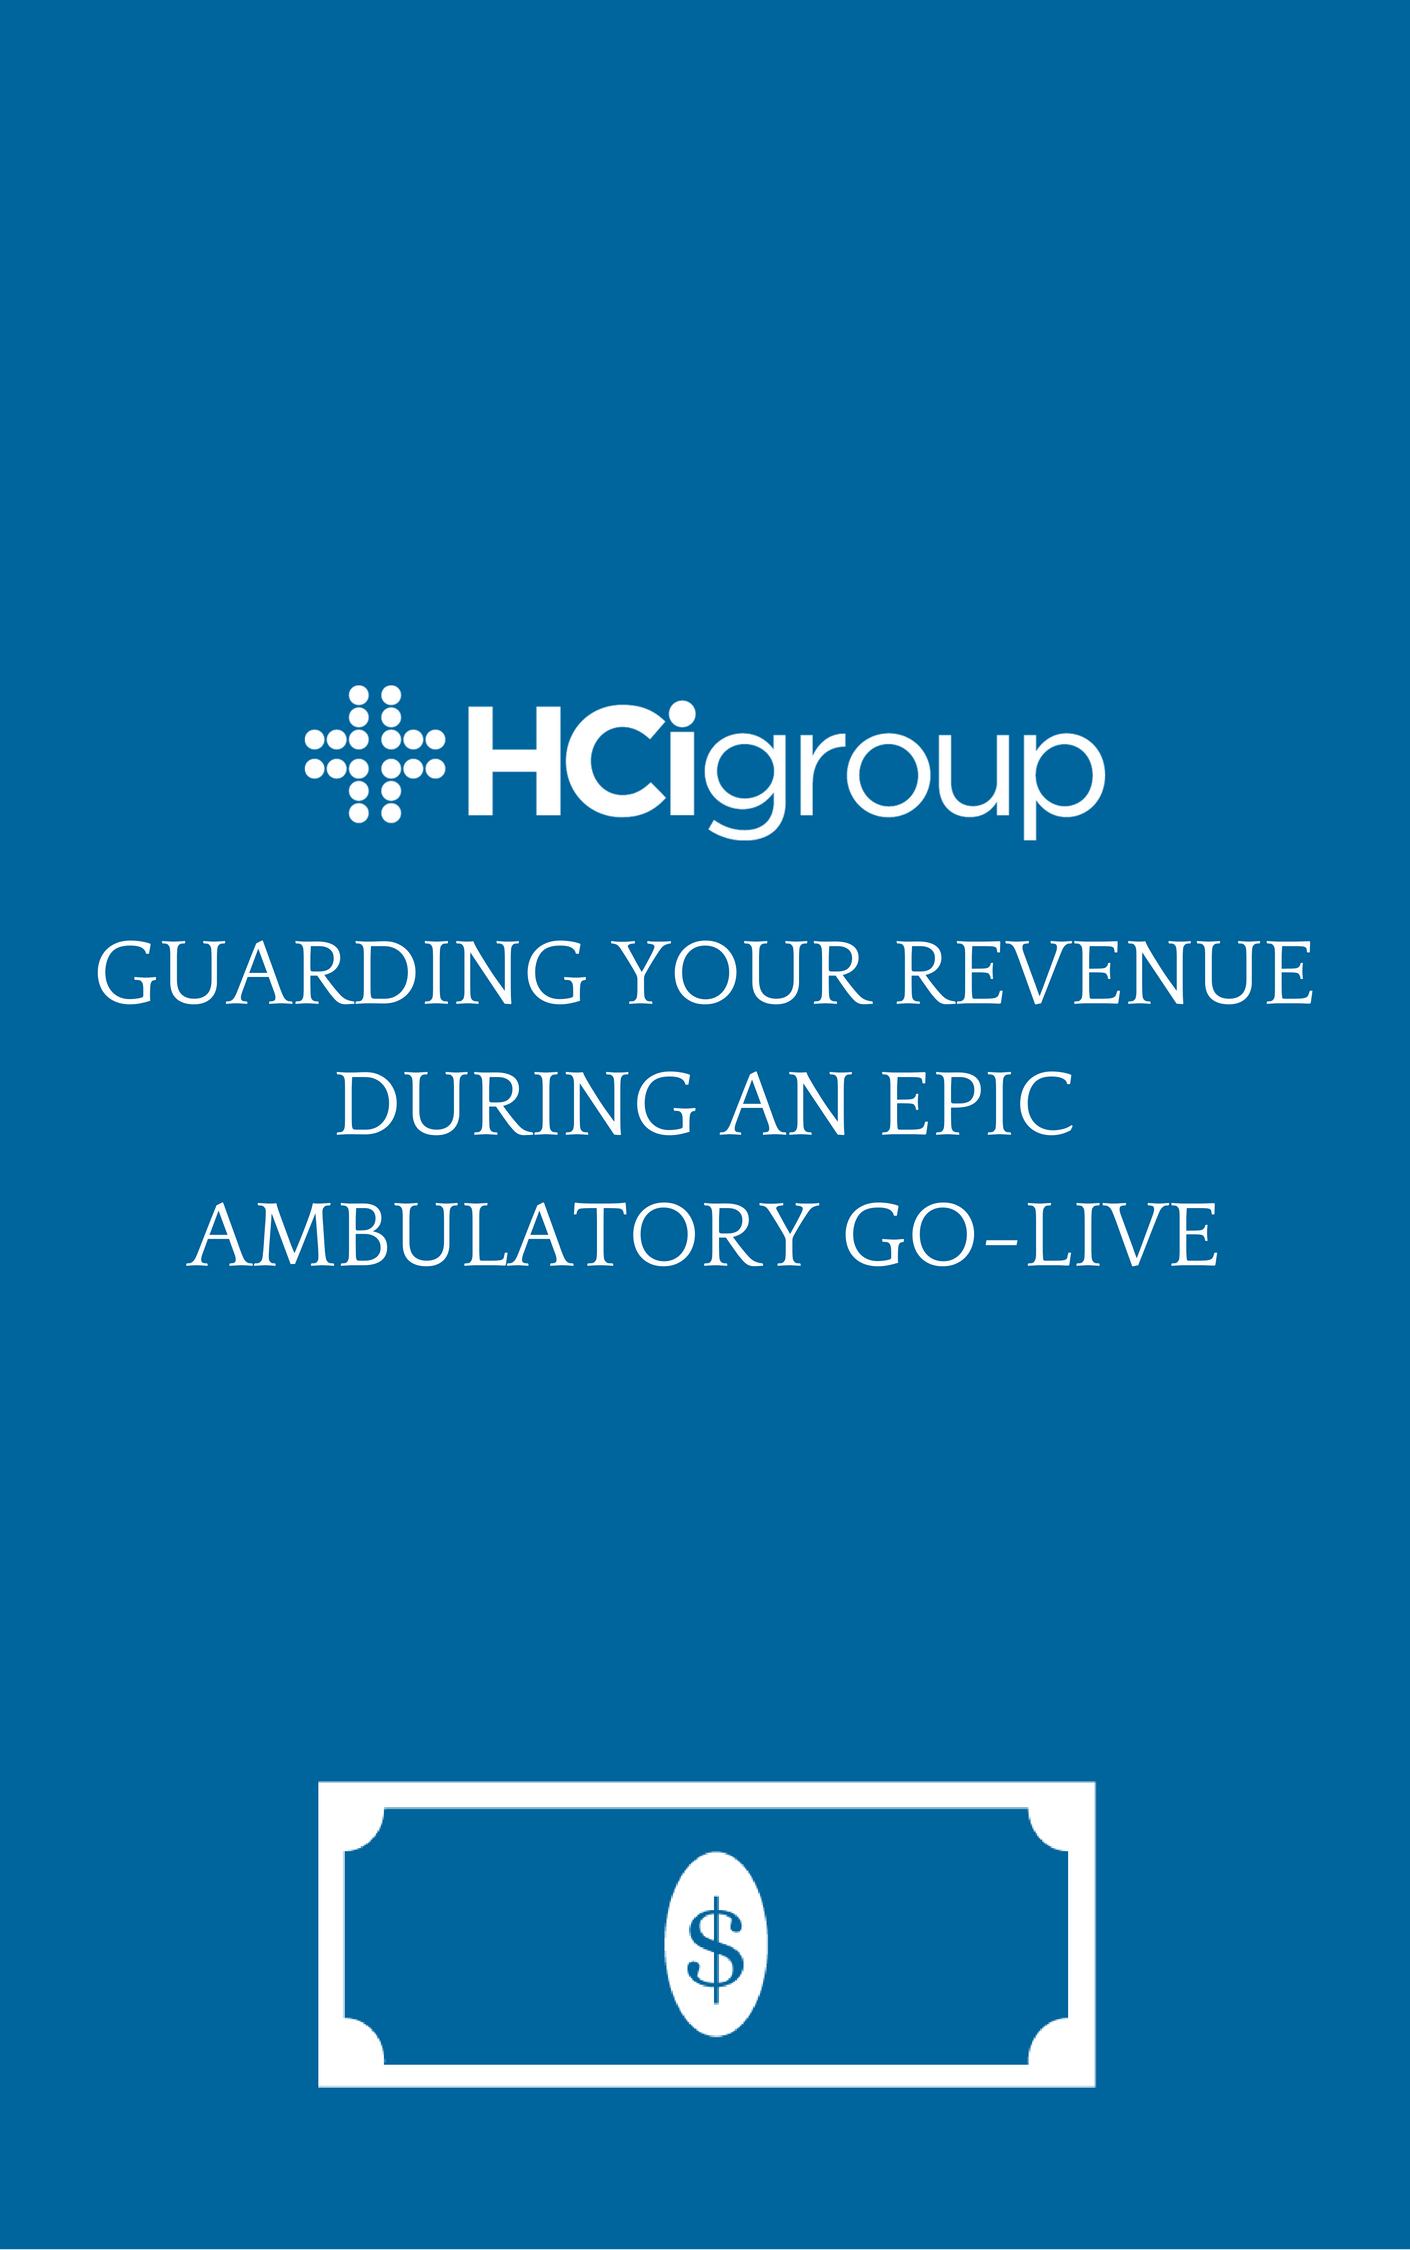 Ambulatory EHR Go-Live: 6 Charging Issues to Watch for